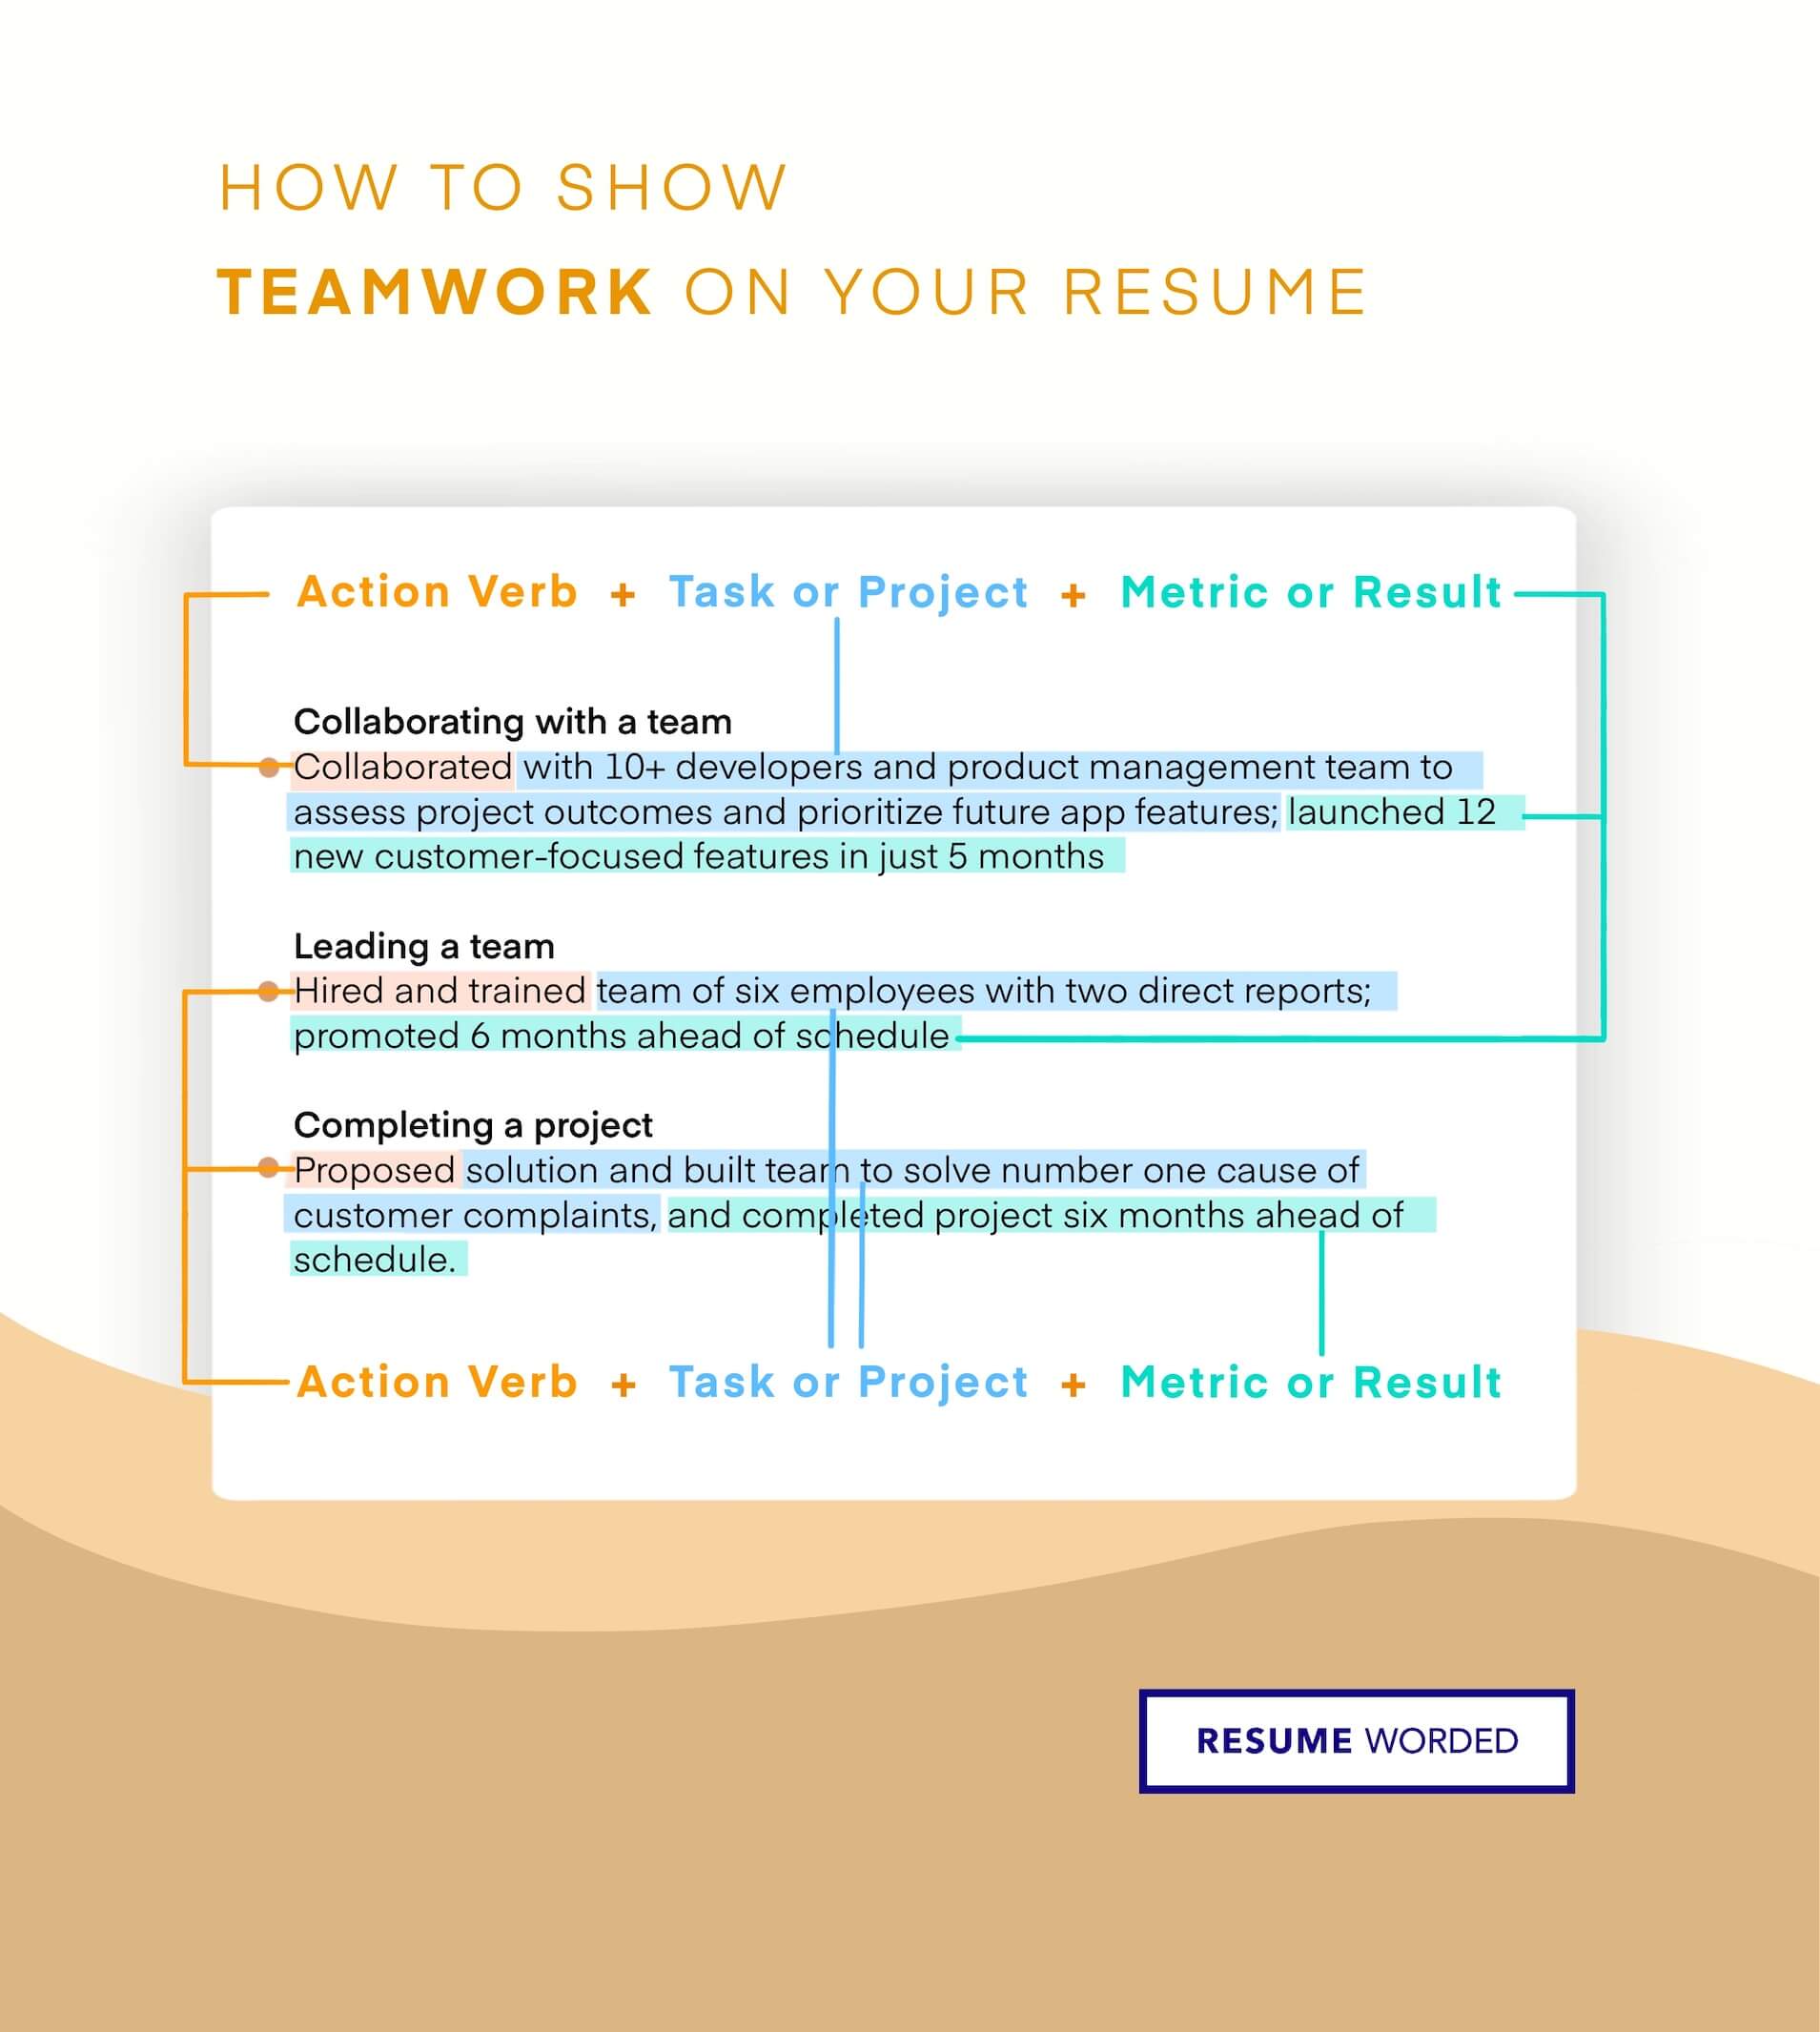 Showcase leadership skills and team activities - Actuarial Manager CV